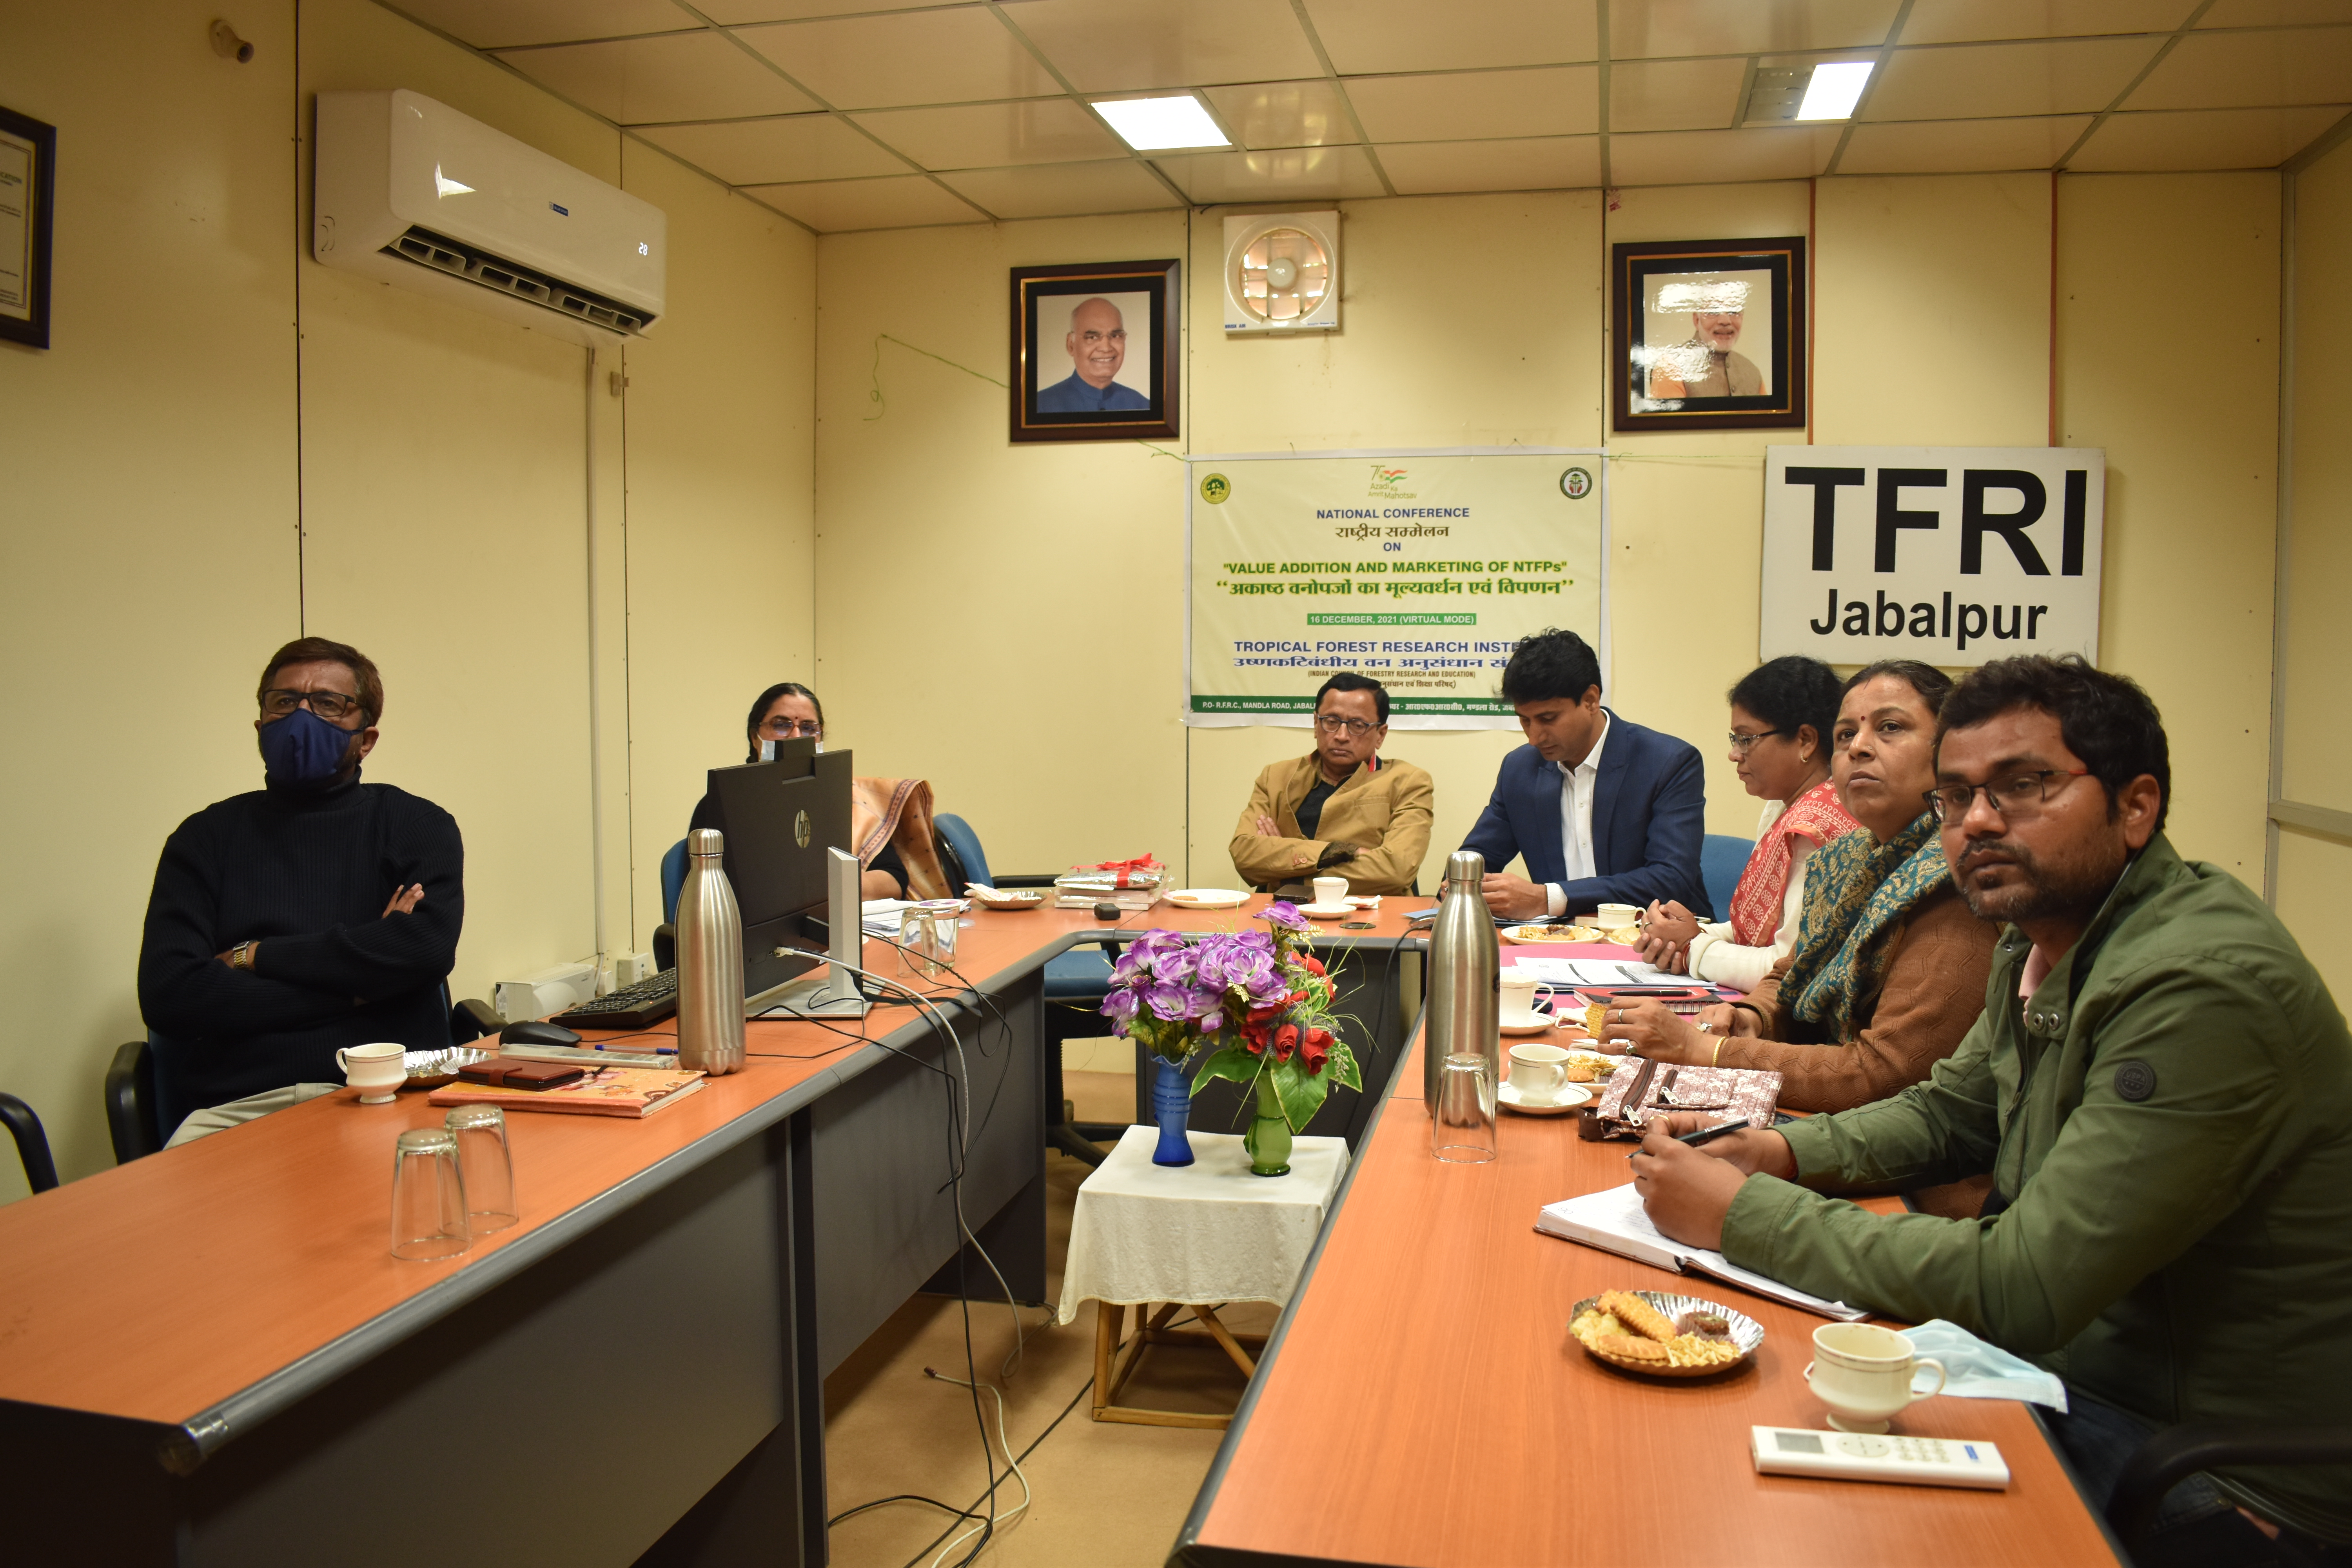 National Conference on Value addition and Marketing of NTFPs (16/12/2021)